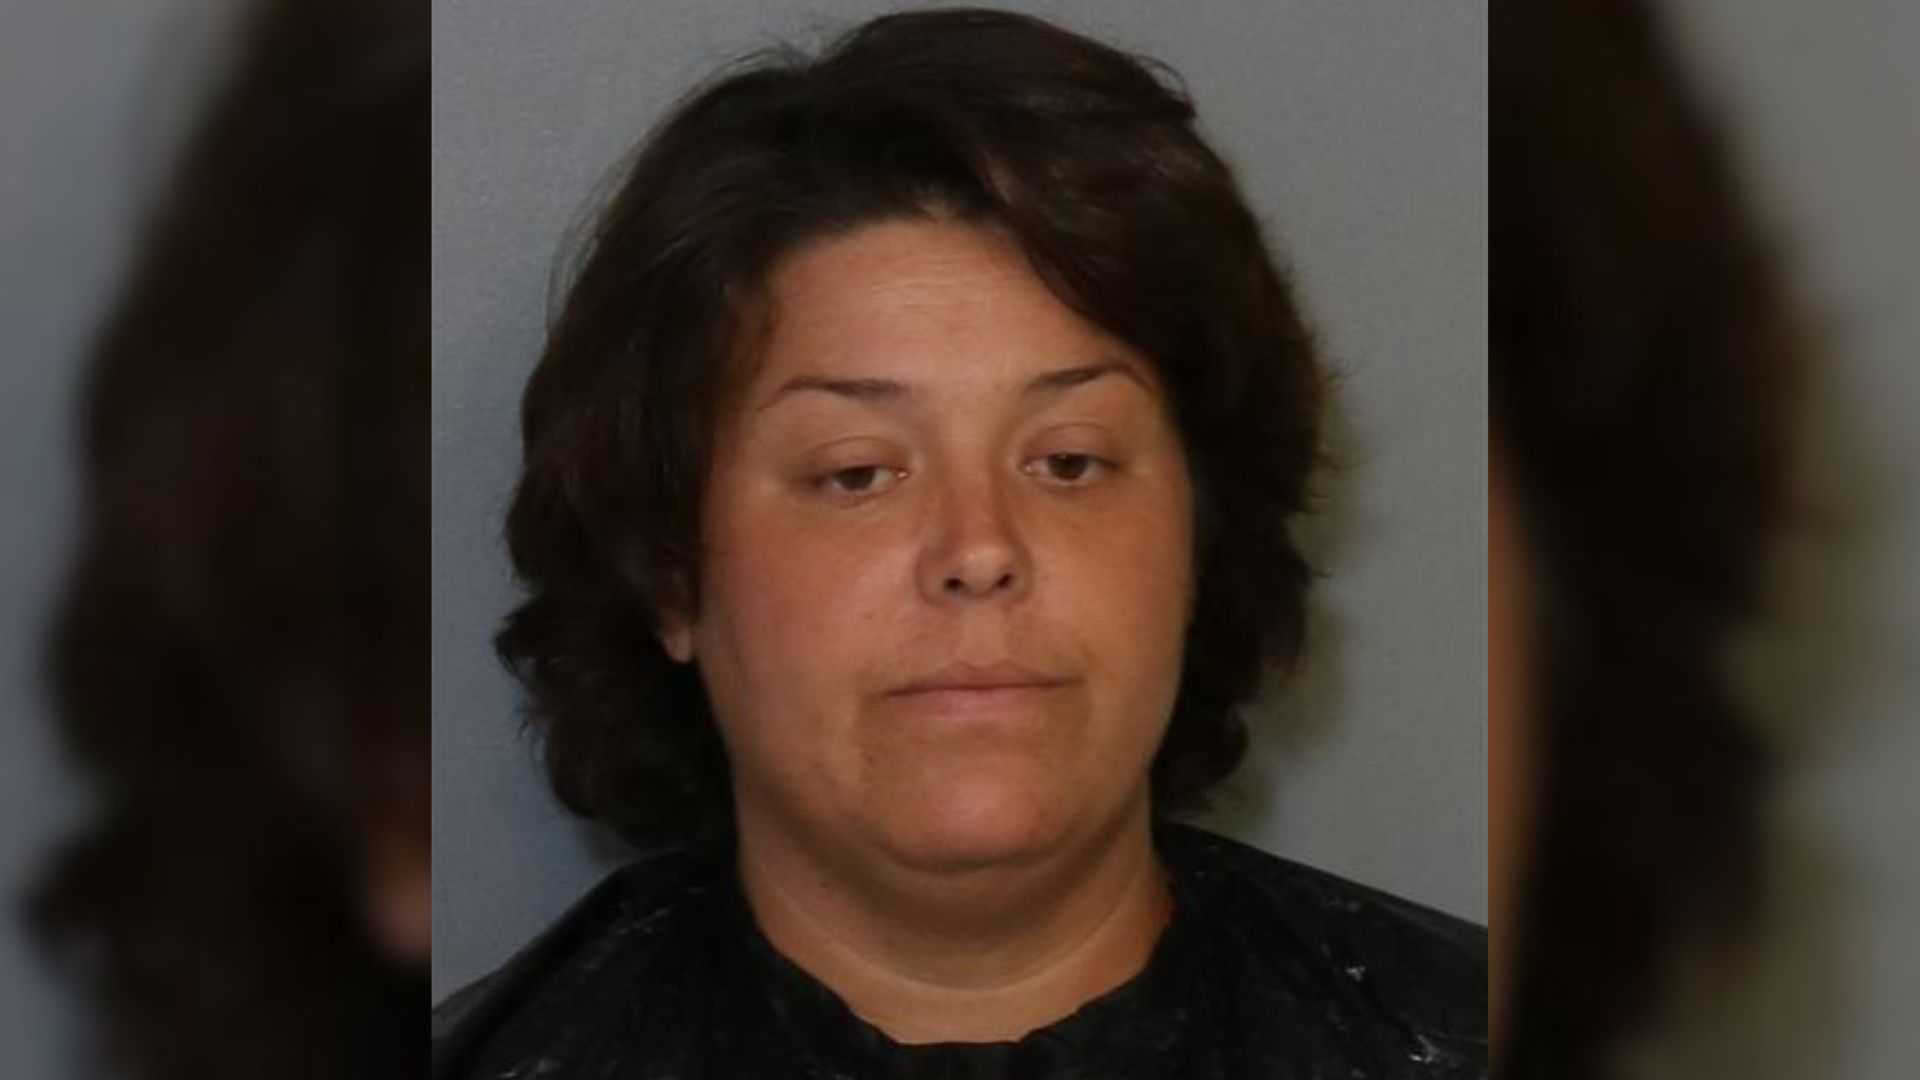 Charges Upgraded For Woman Who Confessed To Strangling Her 13 Year Old Son